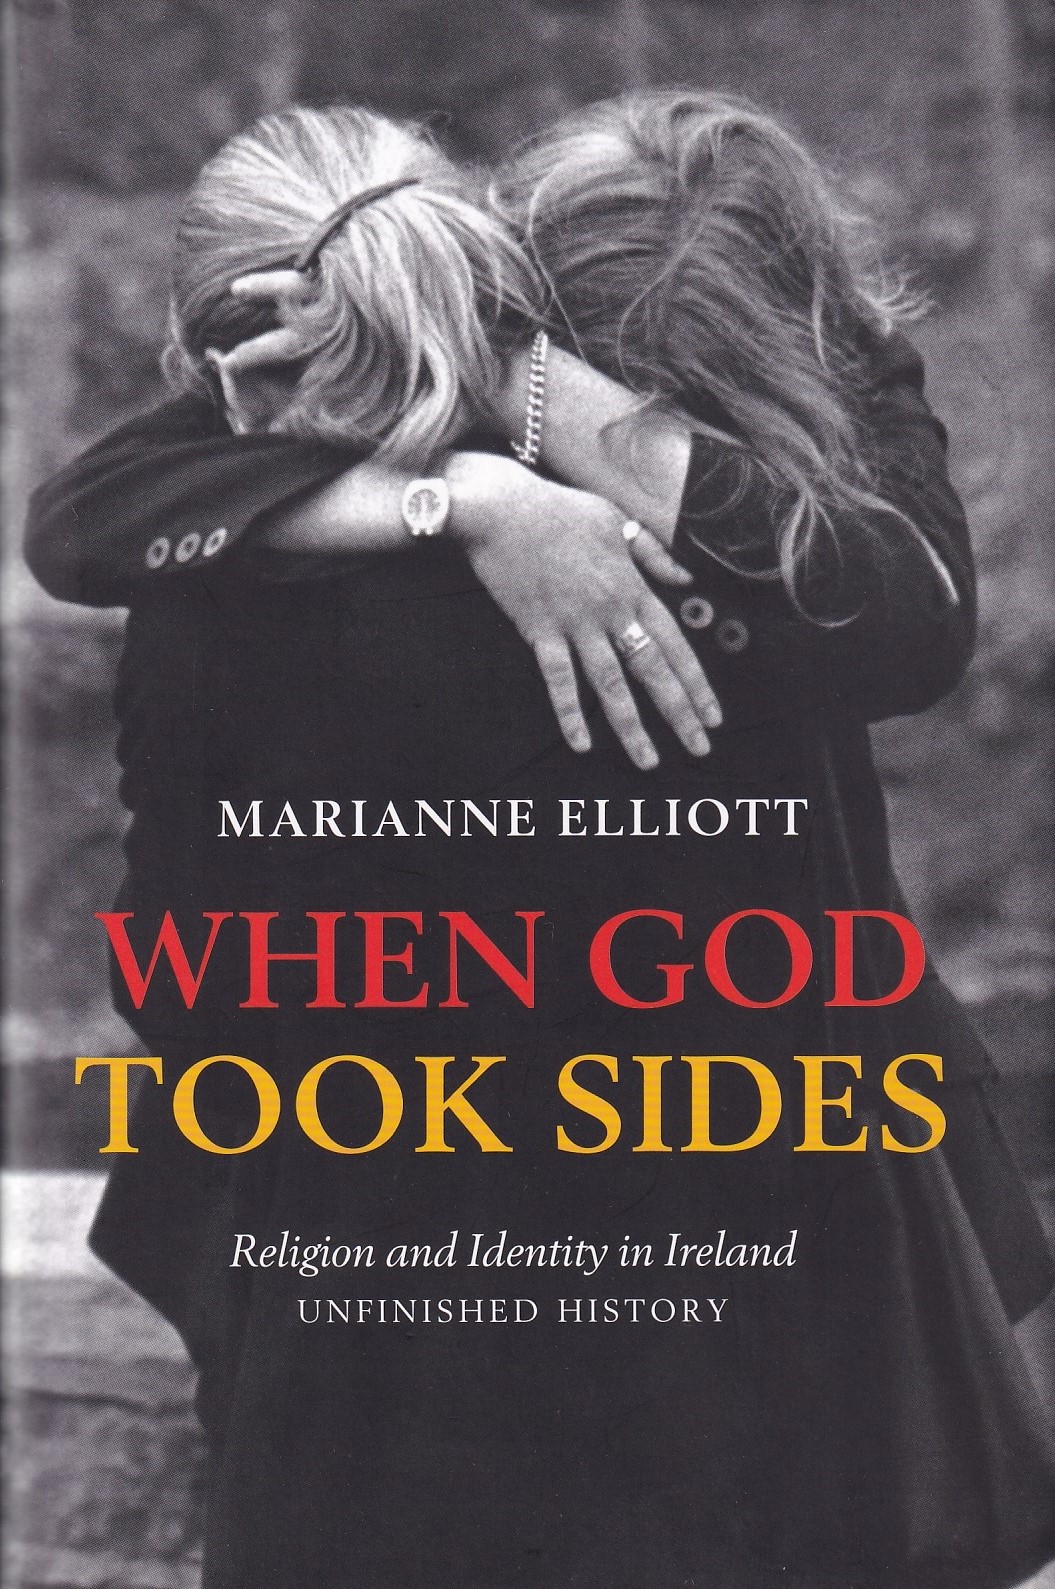 When God Took Sides: Religion and Identity in Irish History: Unfinished History | Marianne Elliott | Charlie Byrne's